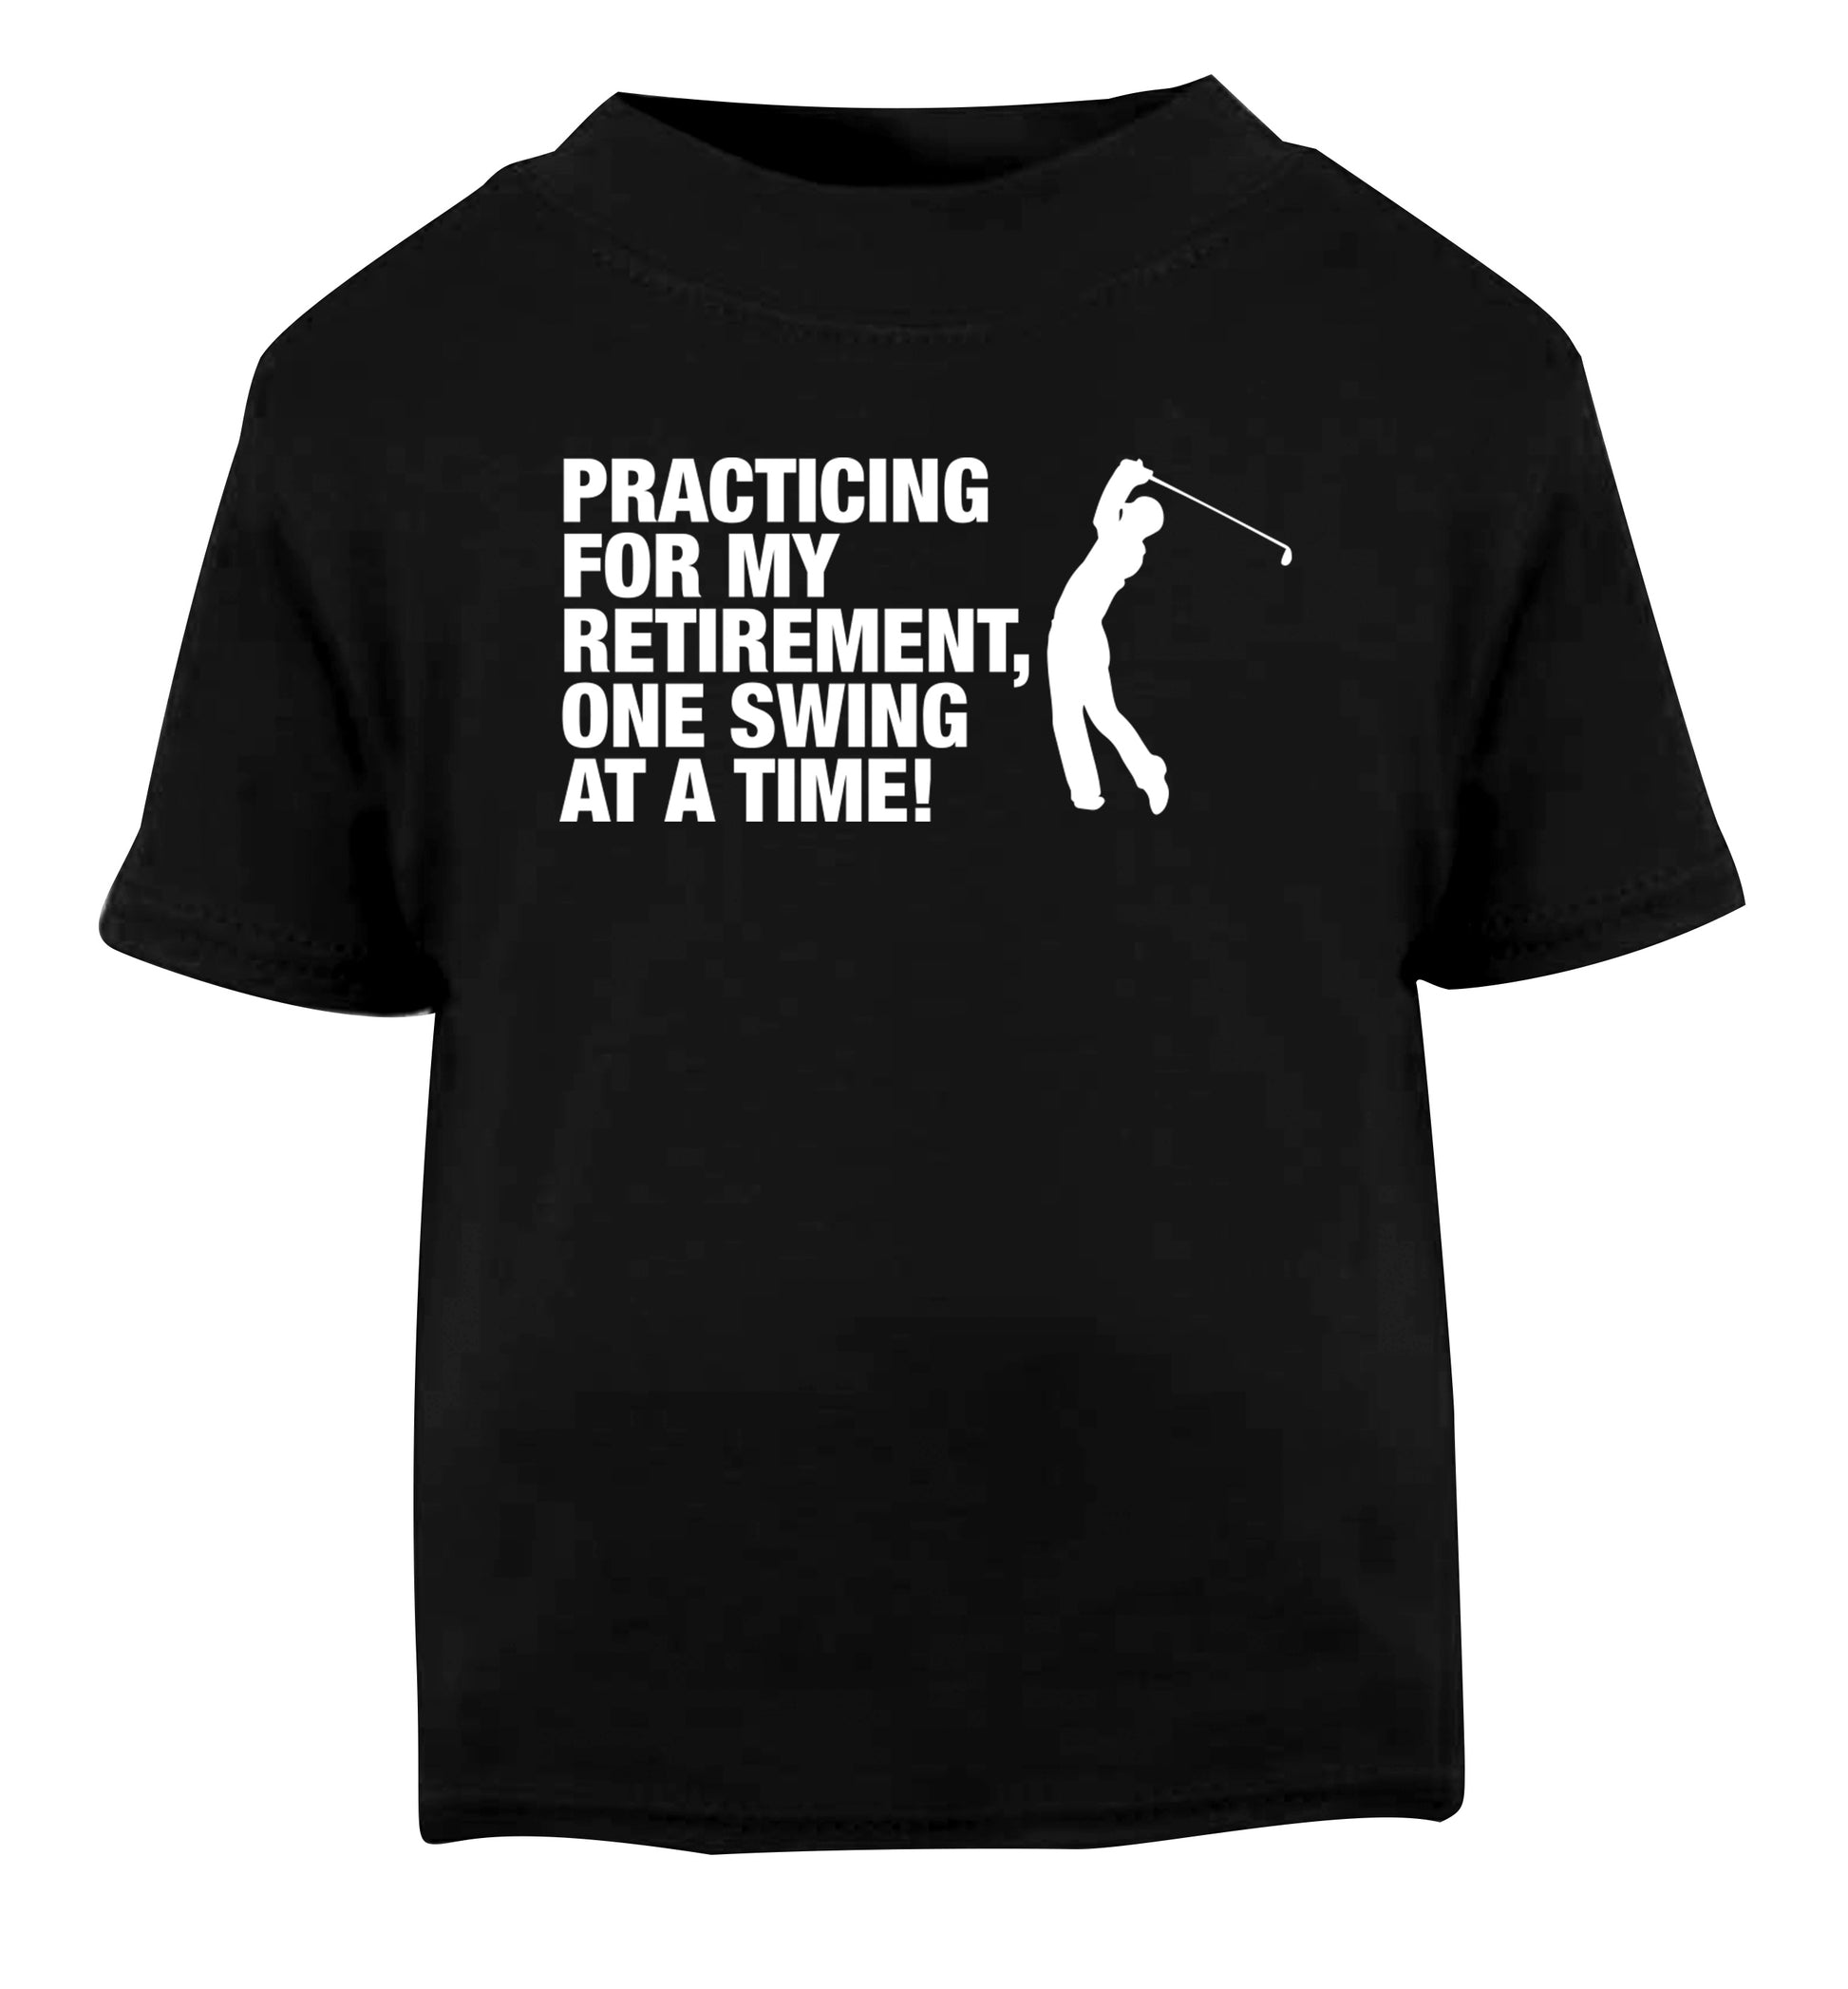 Practicing for my retirement one swing at a time Black Baby Toddler Tshirt 2 years